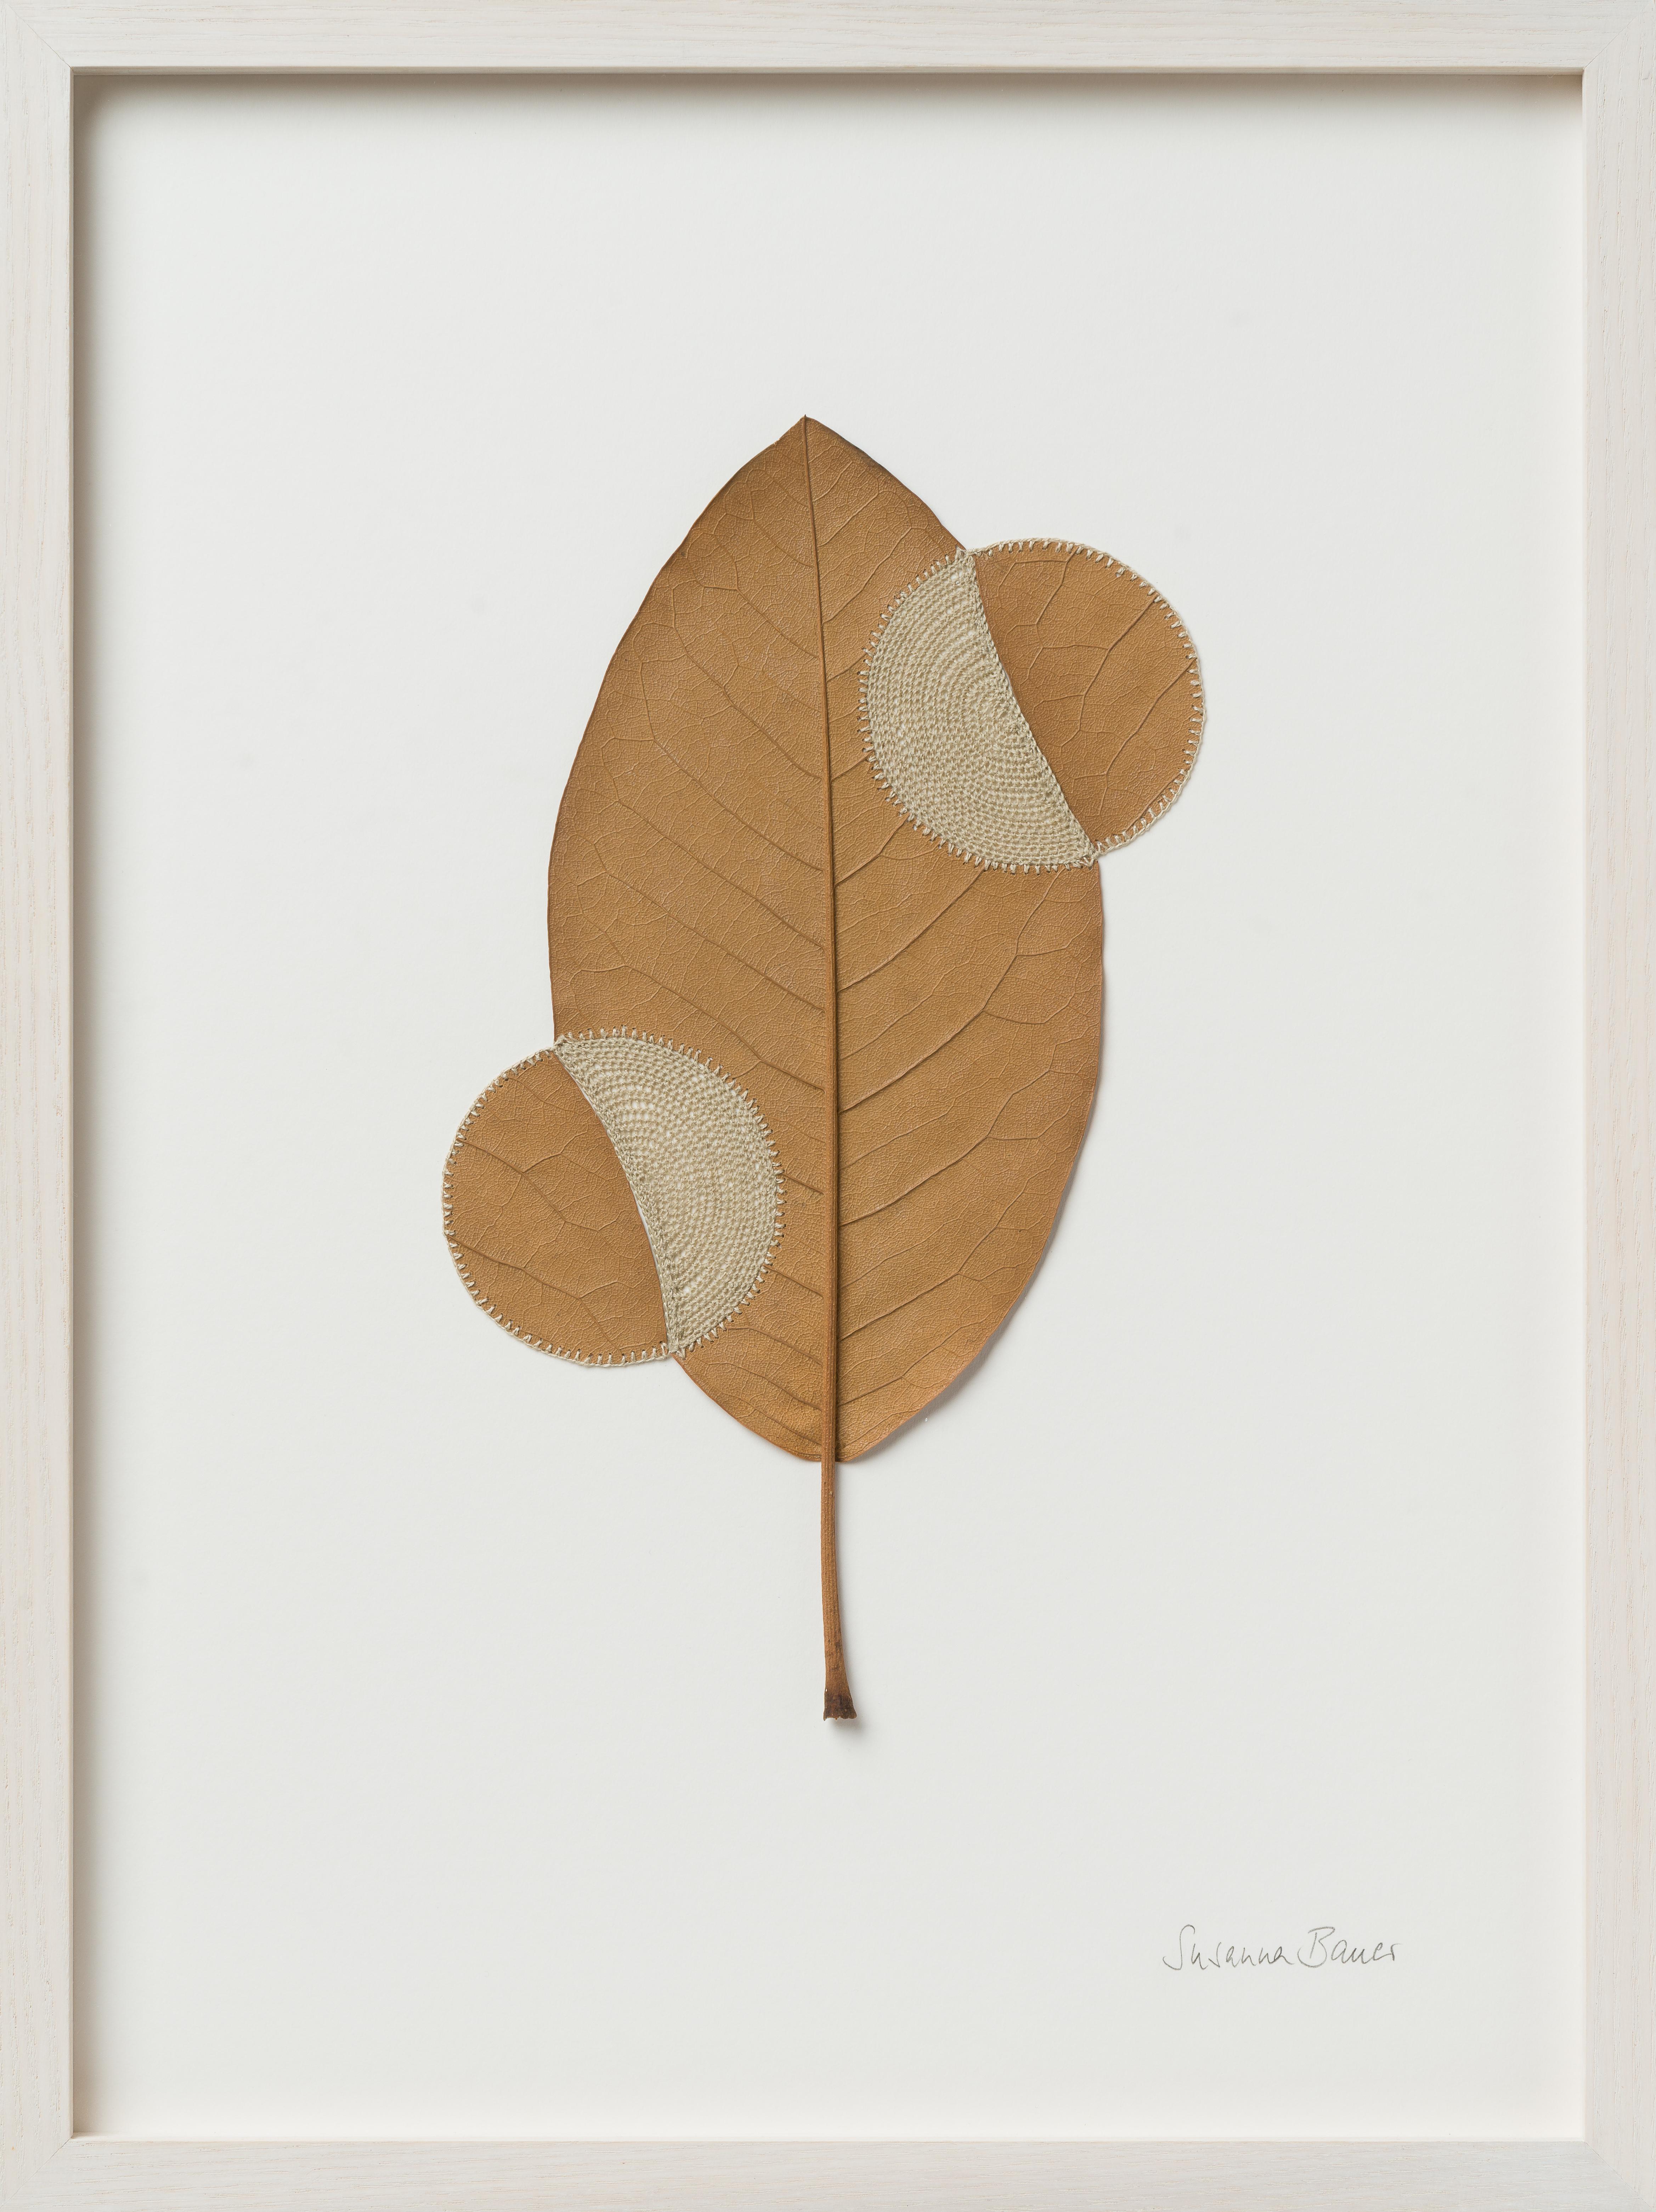 Outwards - intricate embroidery on dried magnolia leaf framed nature art - Art by Susanna Bauer